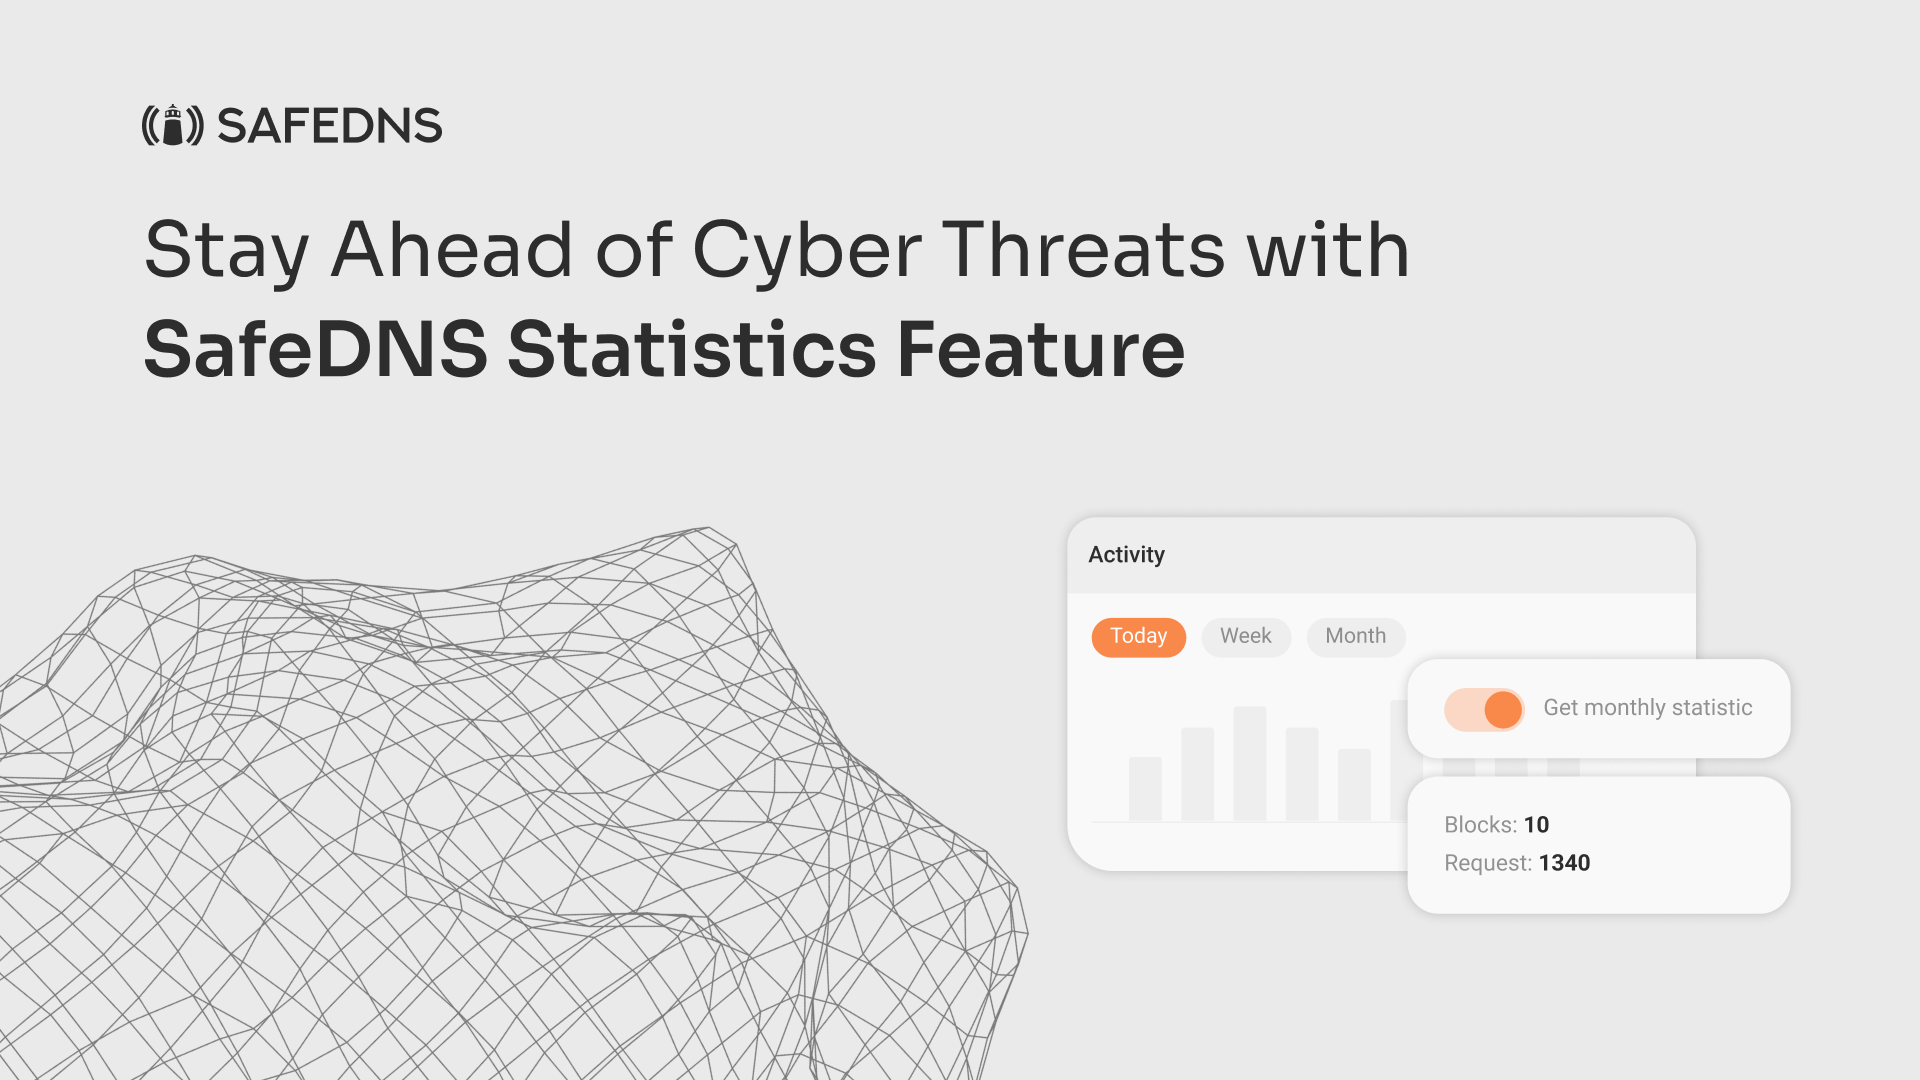 Stay Ahead of Cyber Threats with SafeDNS Statistics Feature